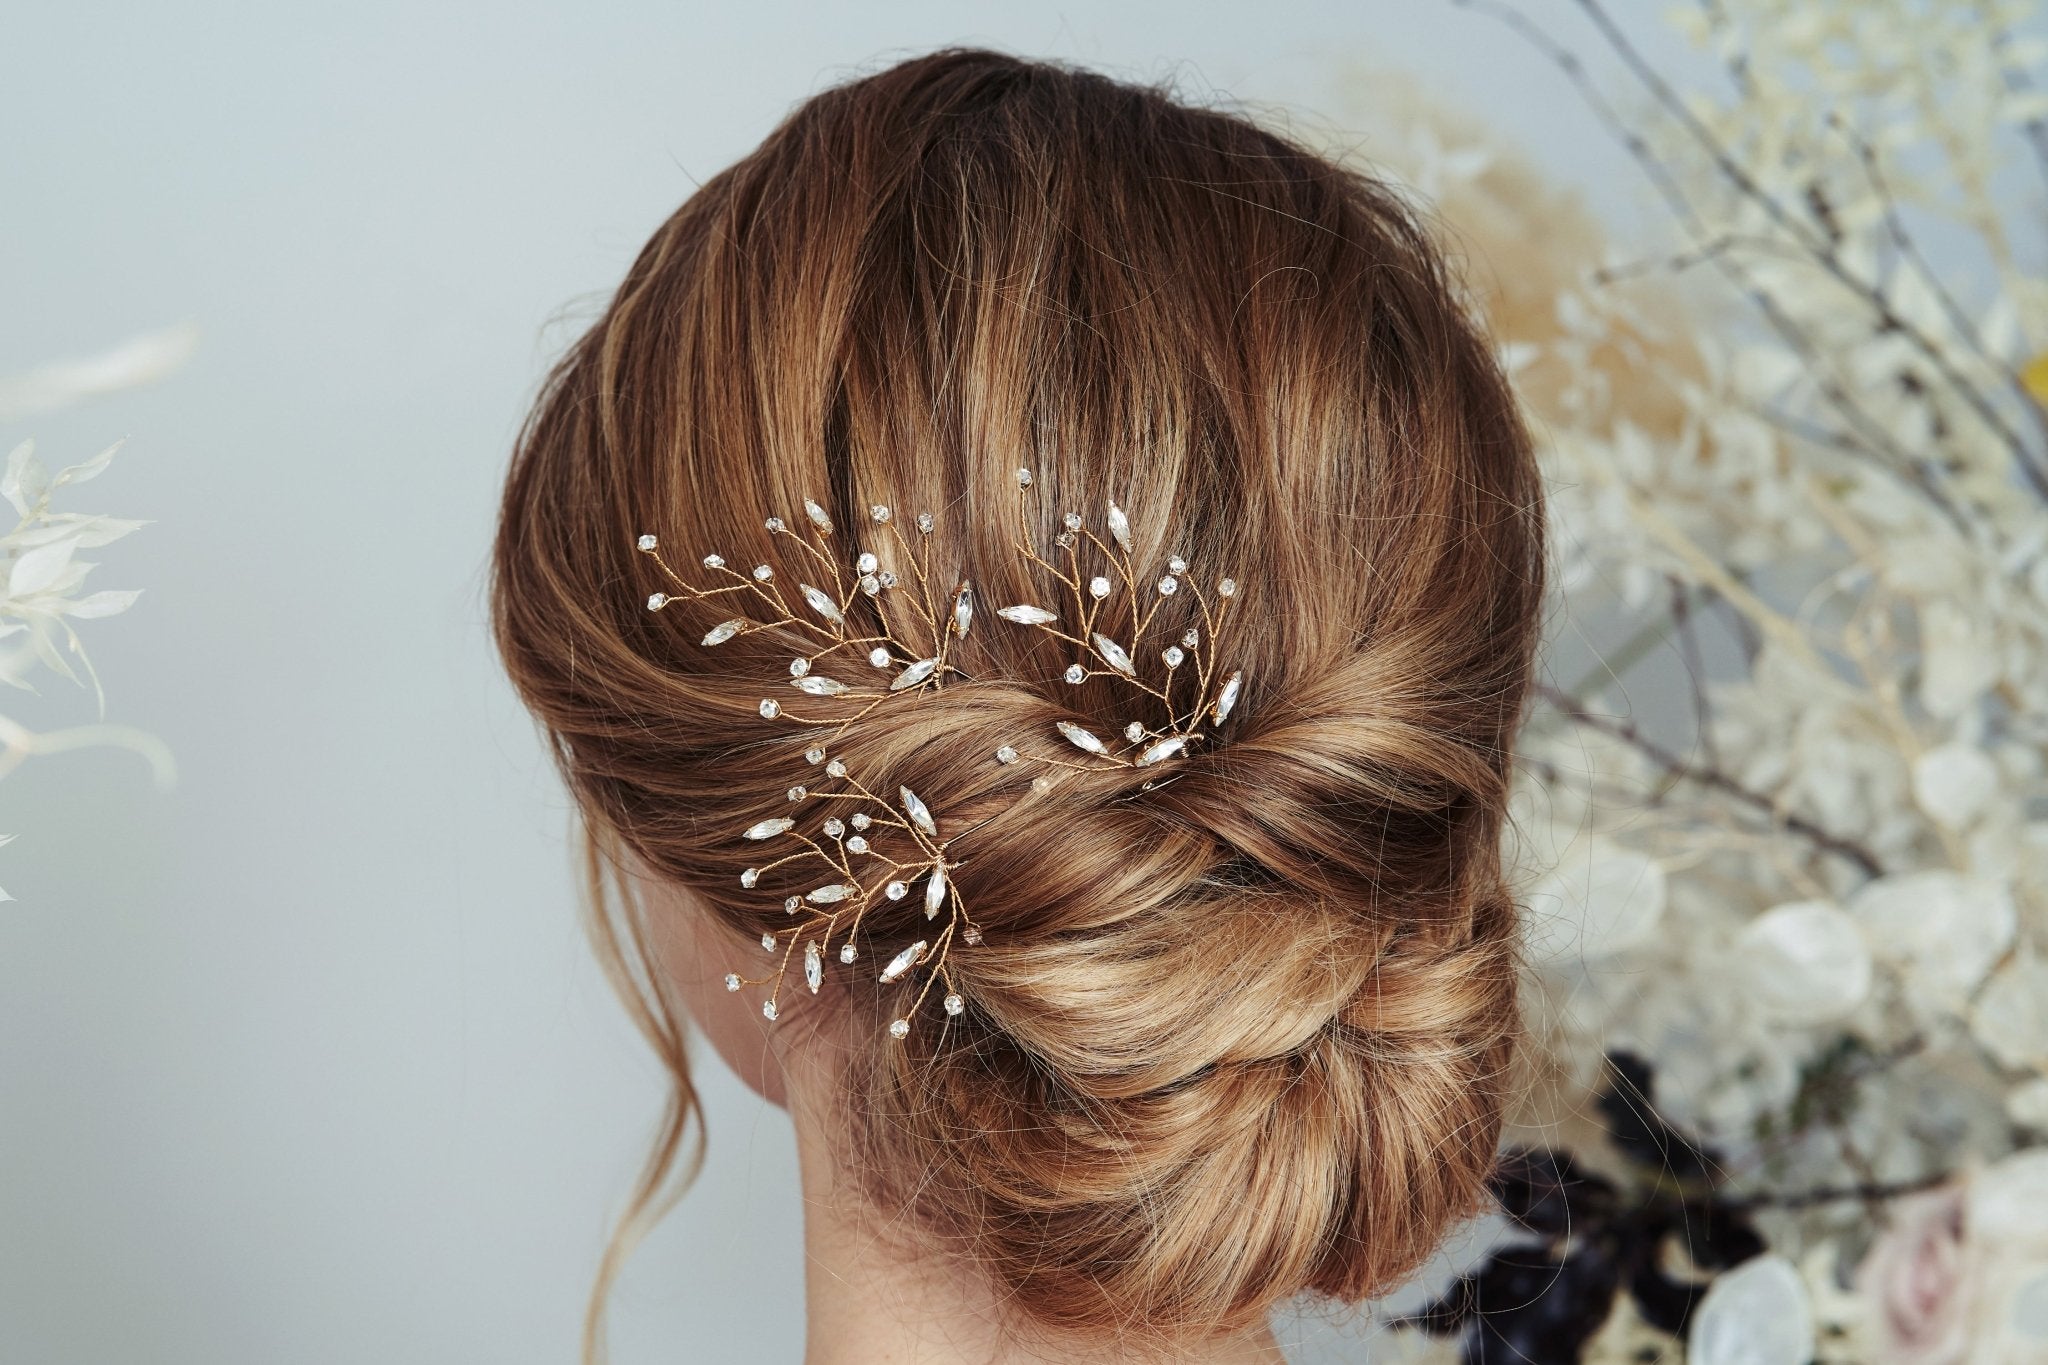 How To Stop Bridal Hair Pins Falling Out - Three Easy Expert Tricks